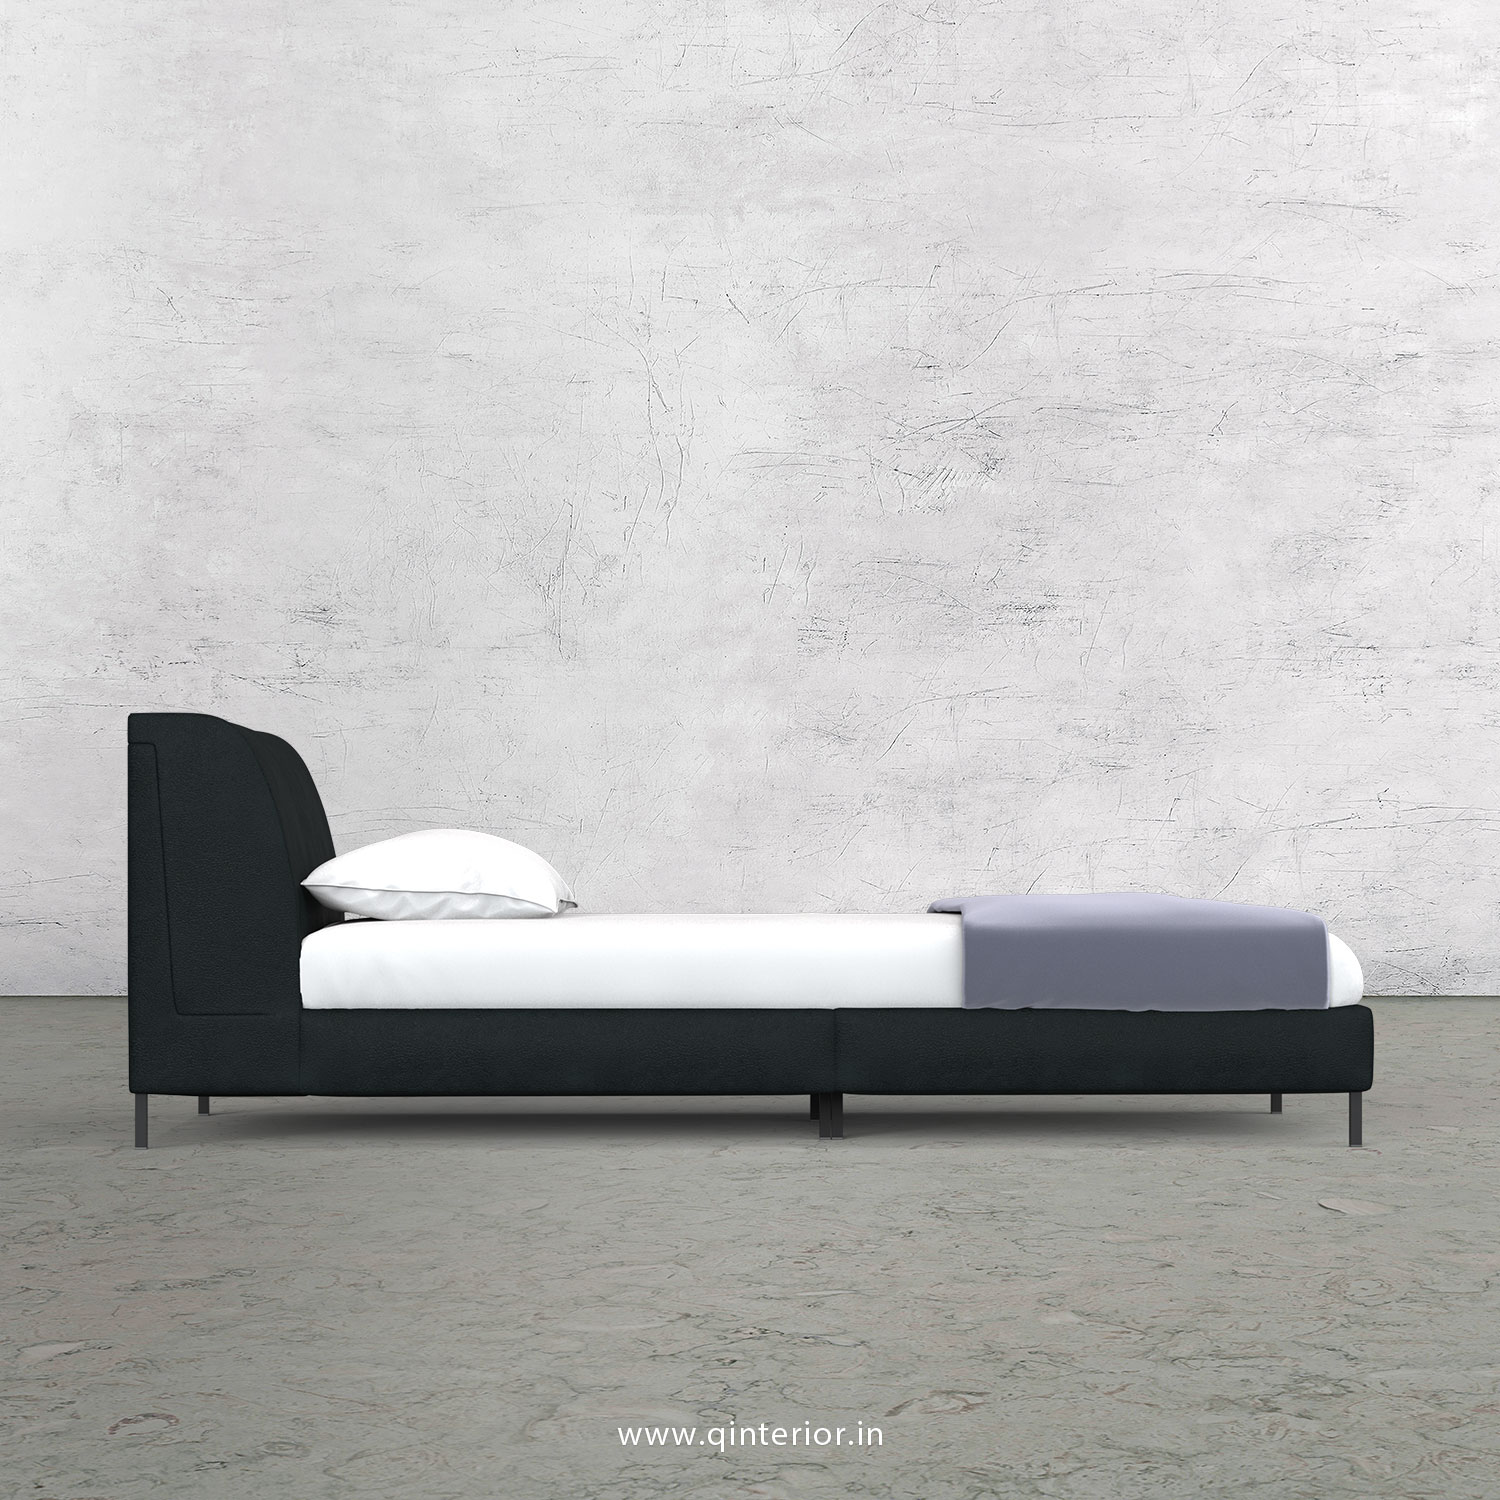 Luxura King Size Bed in Fab Leather Fabric - KBD003 FL13